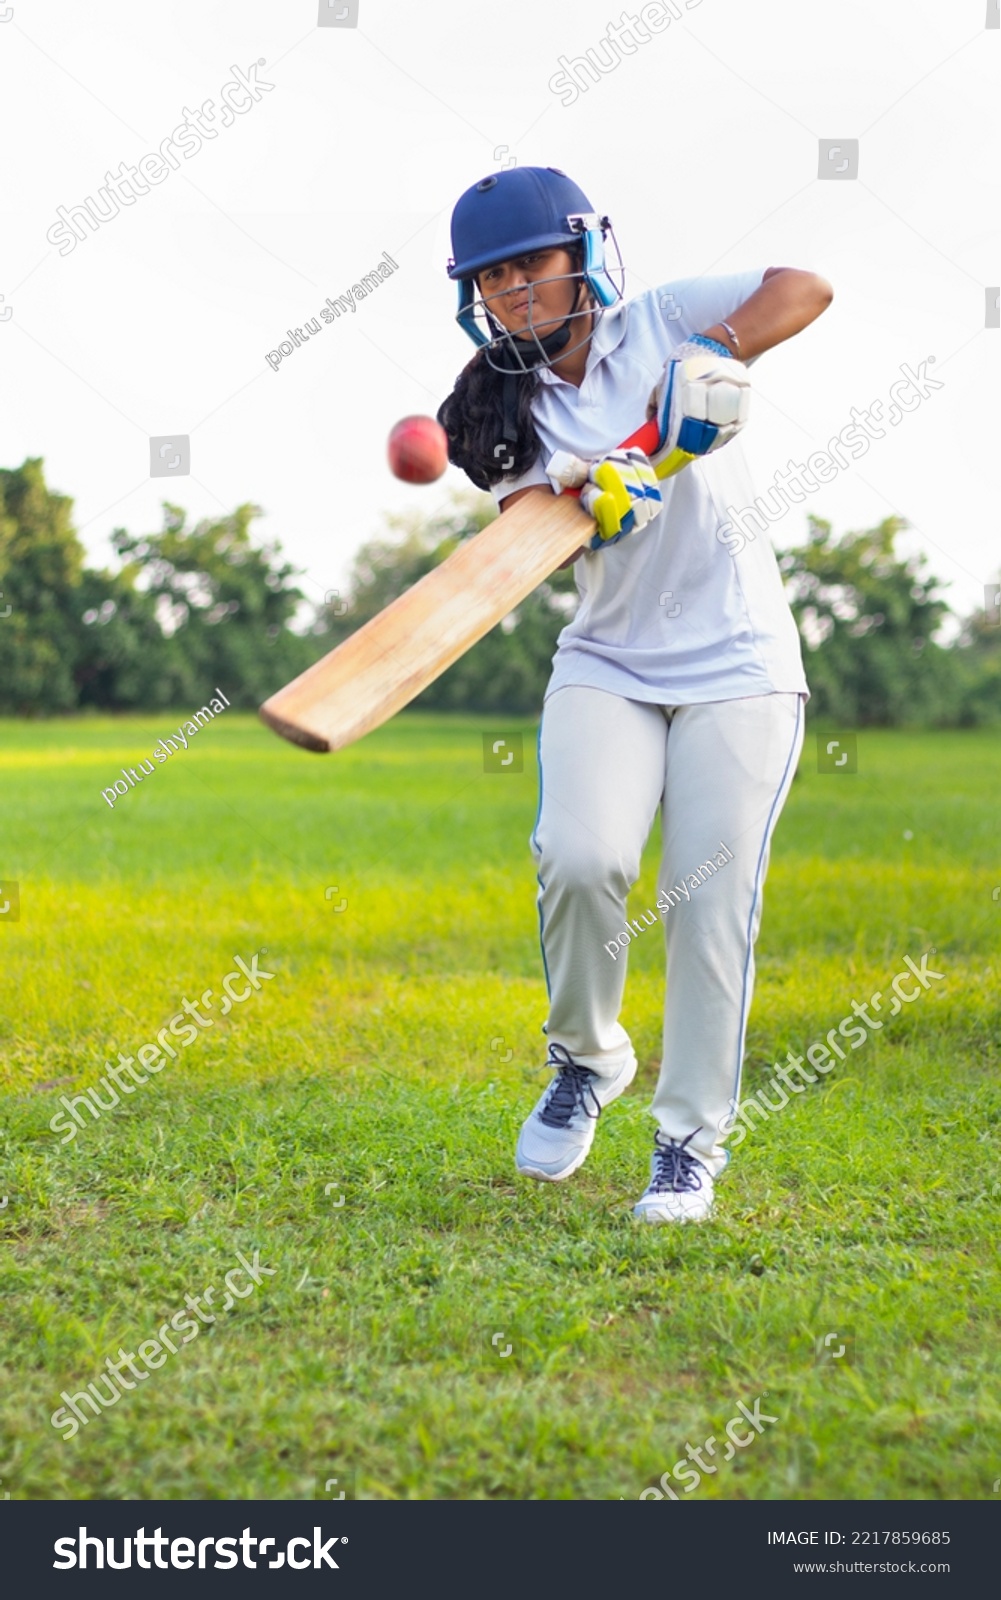 Female Indian cricket player wearing protective gear and hitting the ball with a bat on the field #2217859685